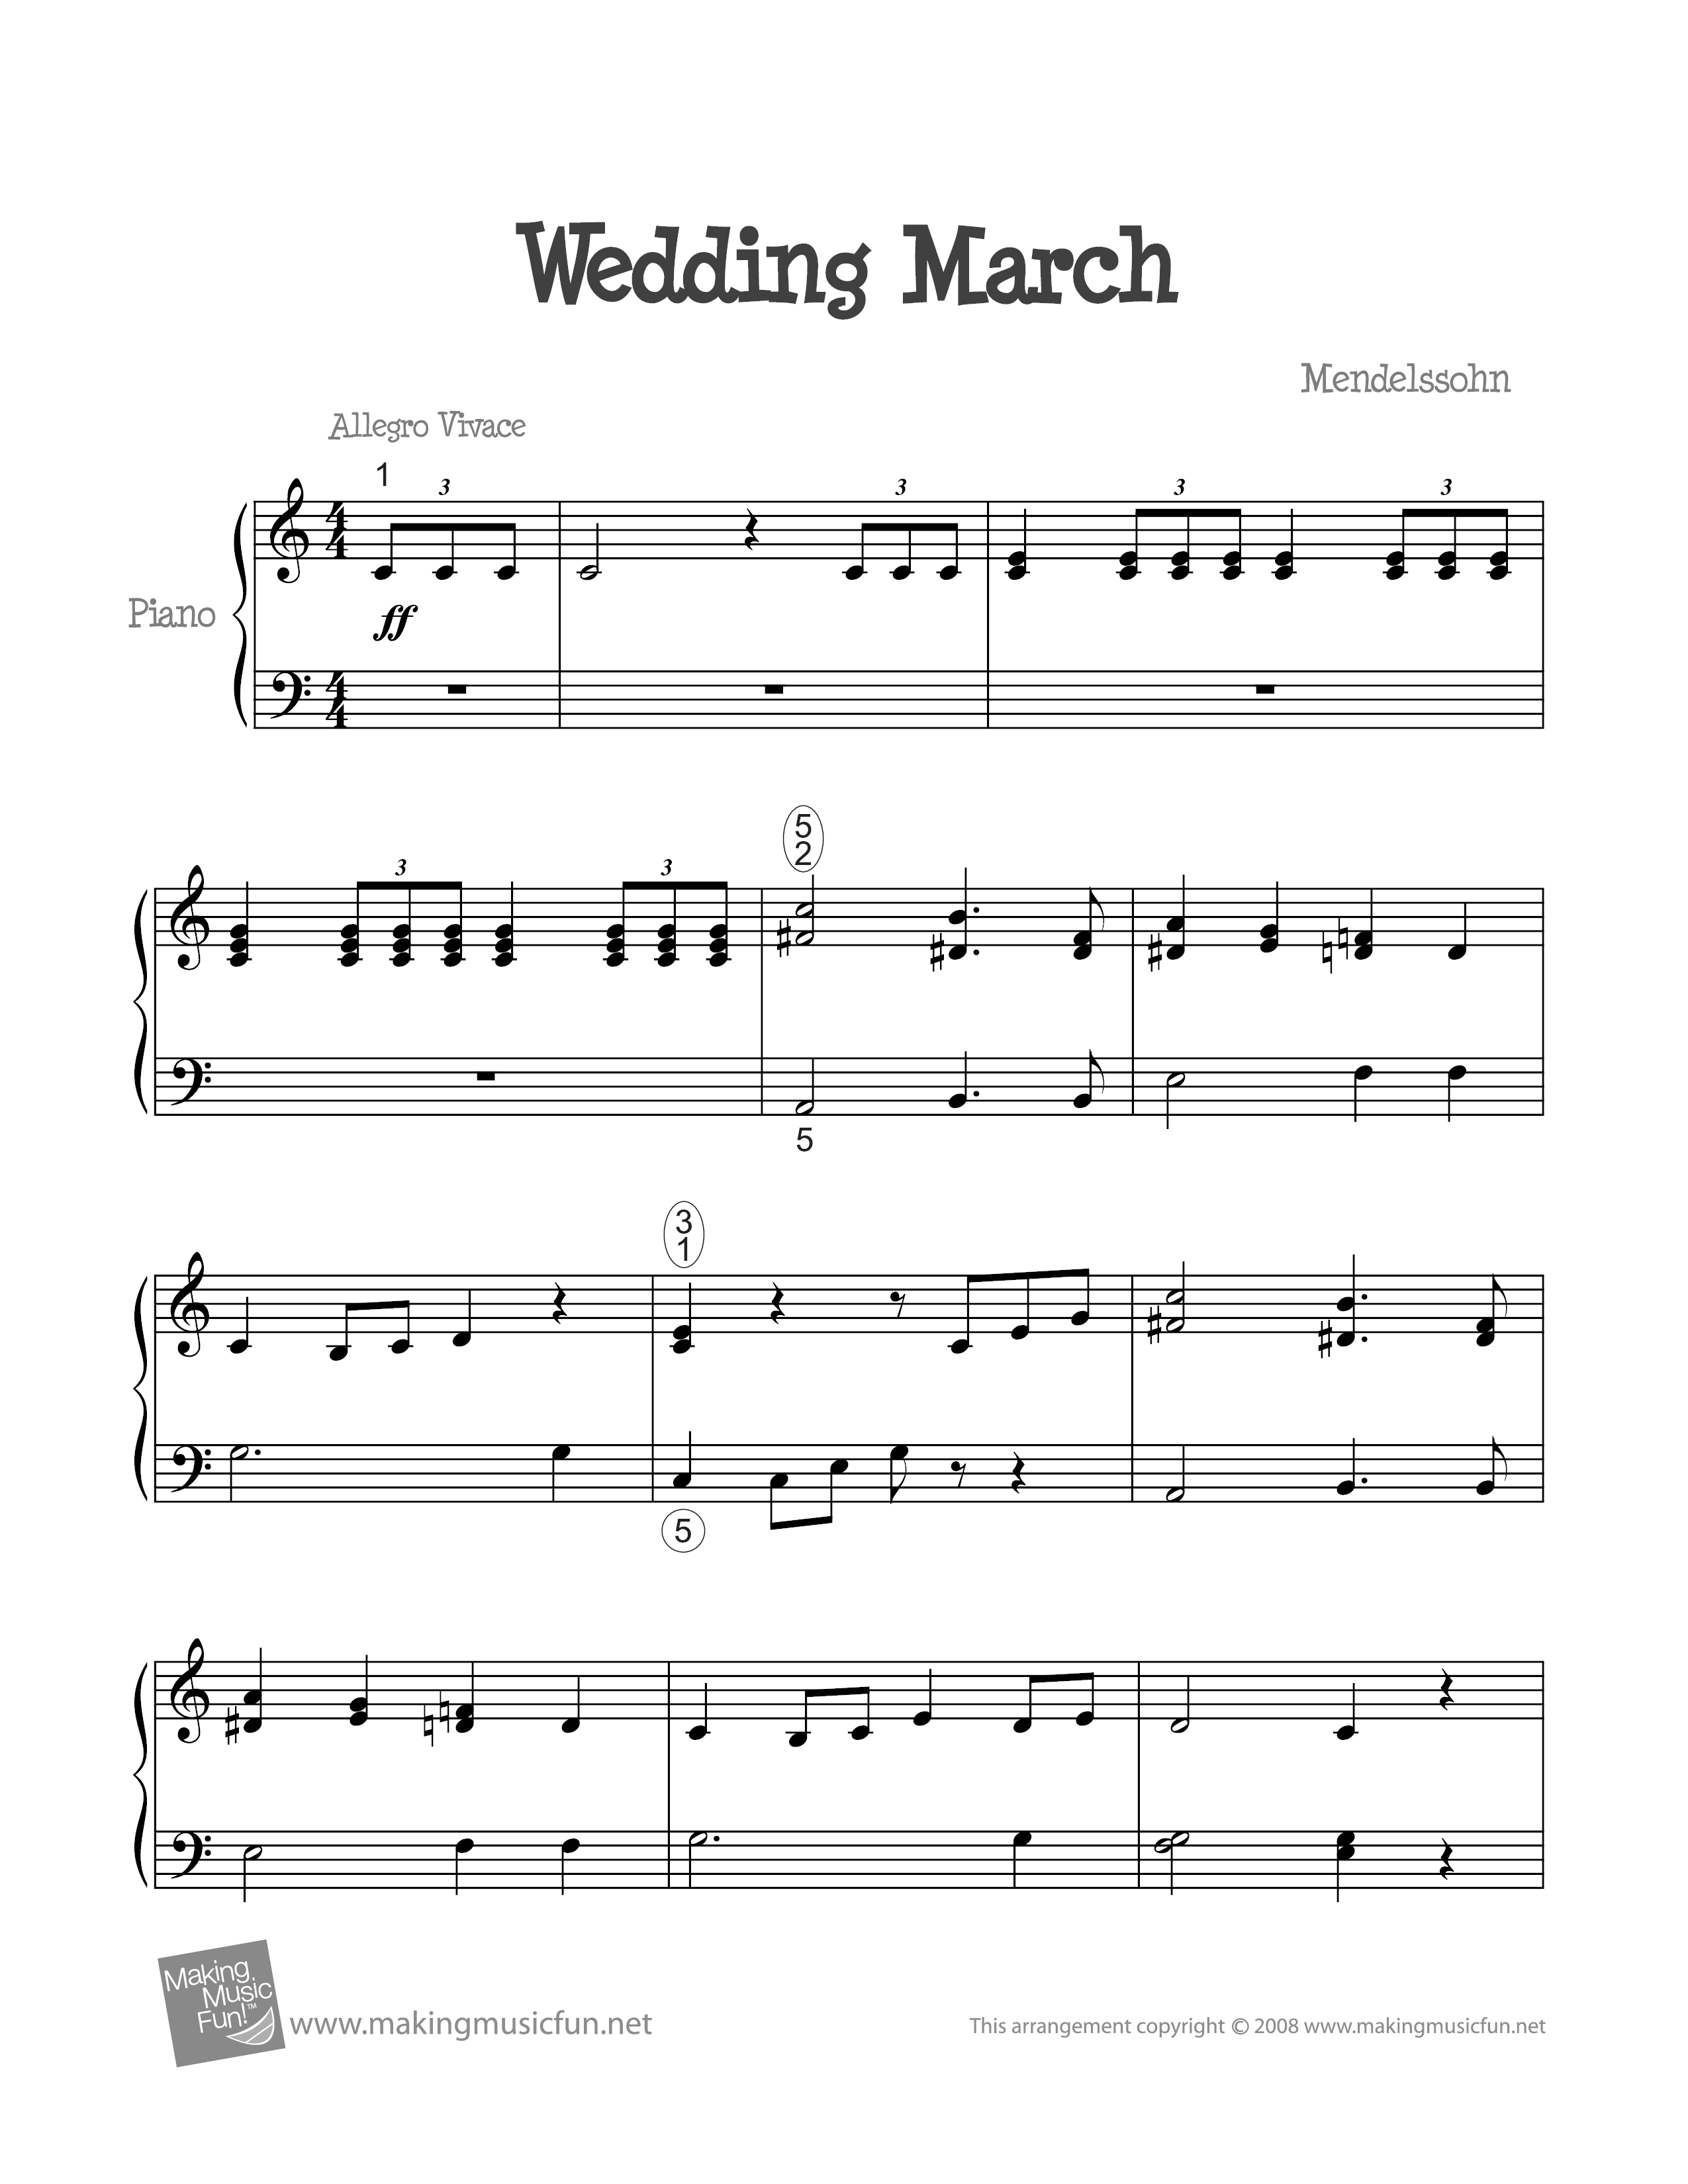 Wedding March 婚禮進行曲ピアノ譜